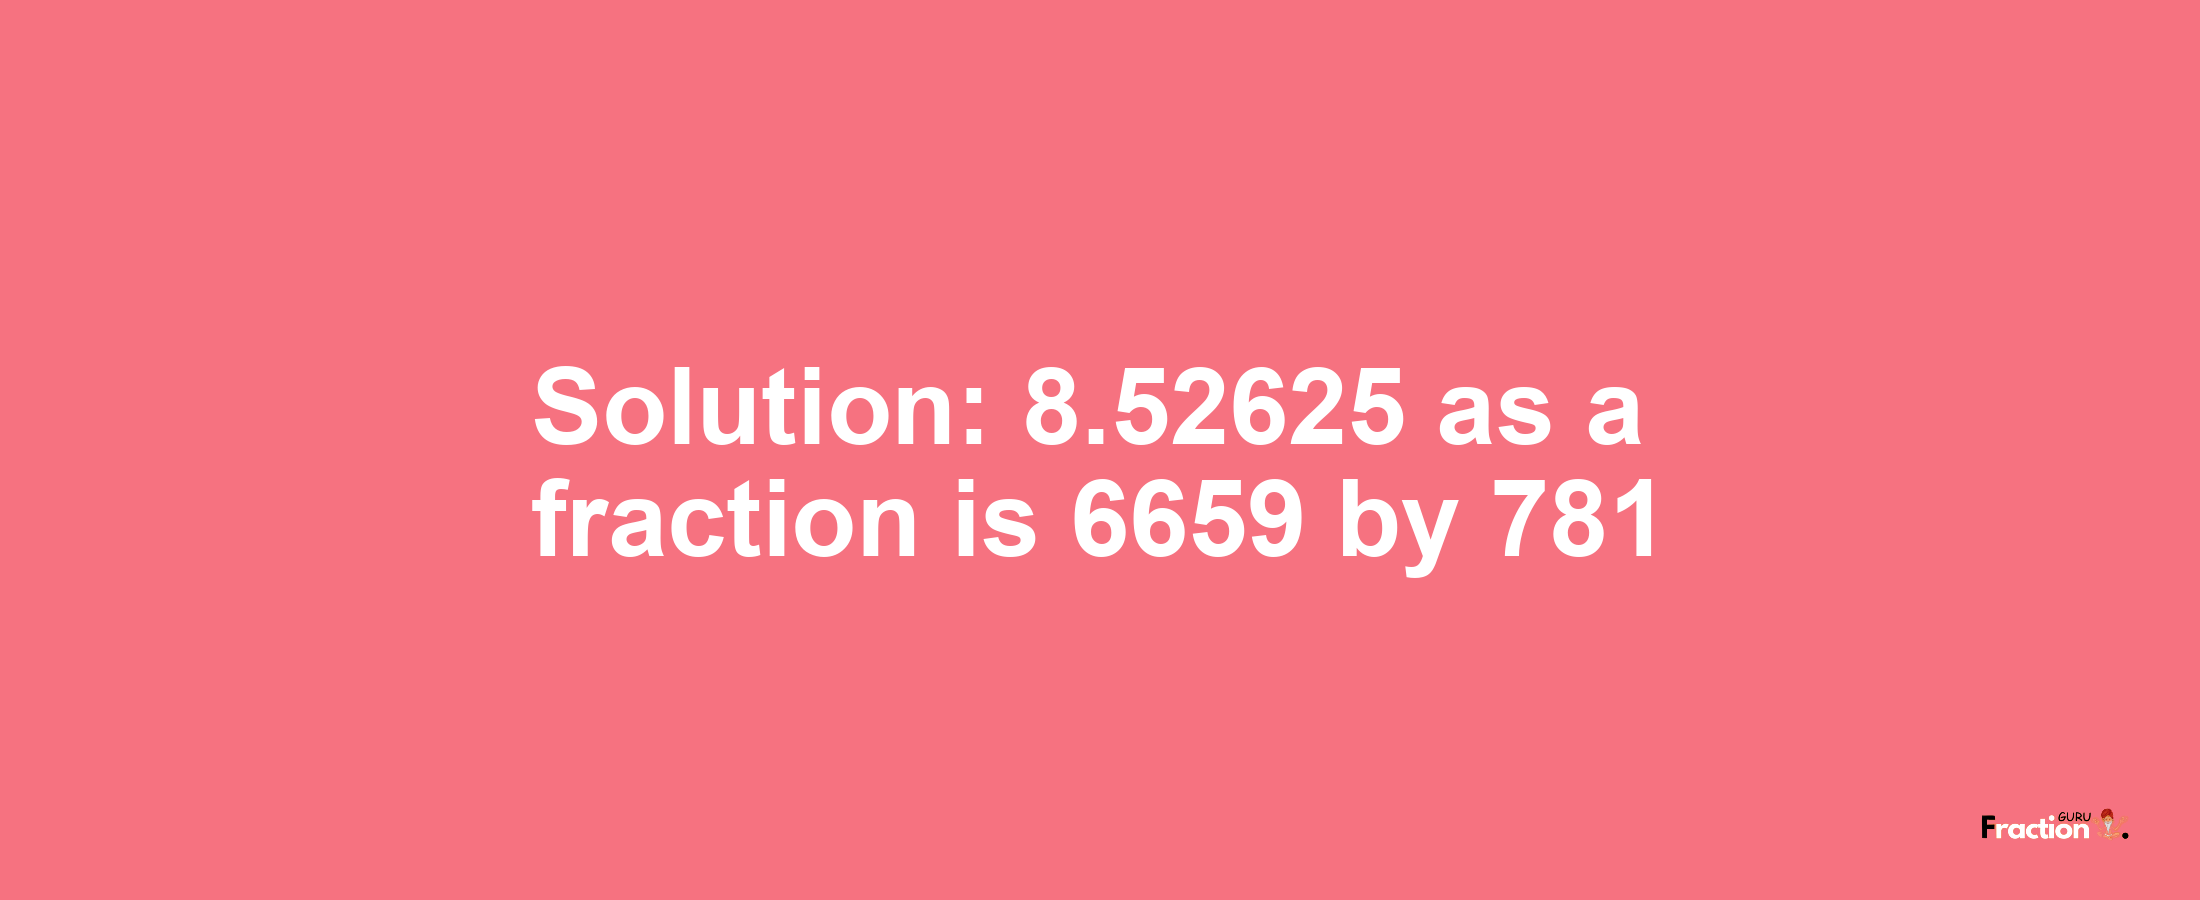 Solution:8.52625 as a fraction is 6659/781